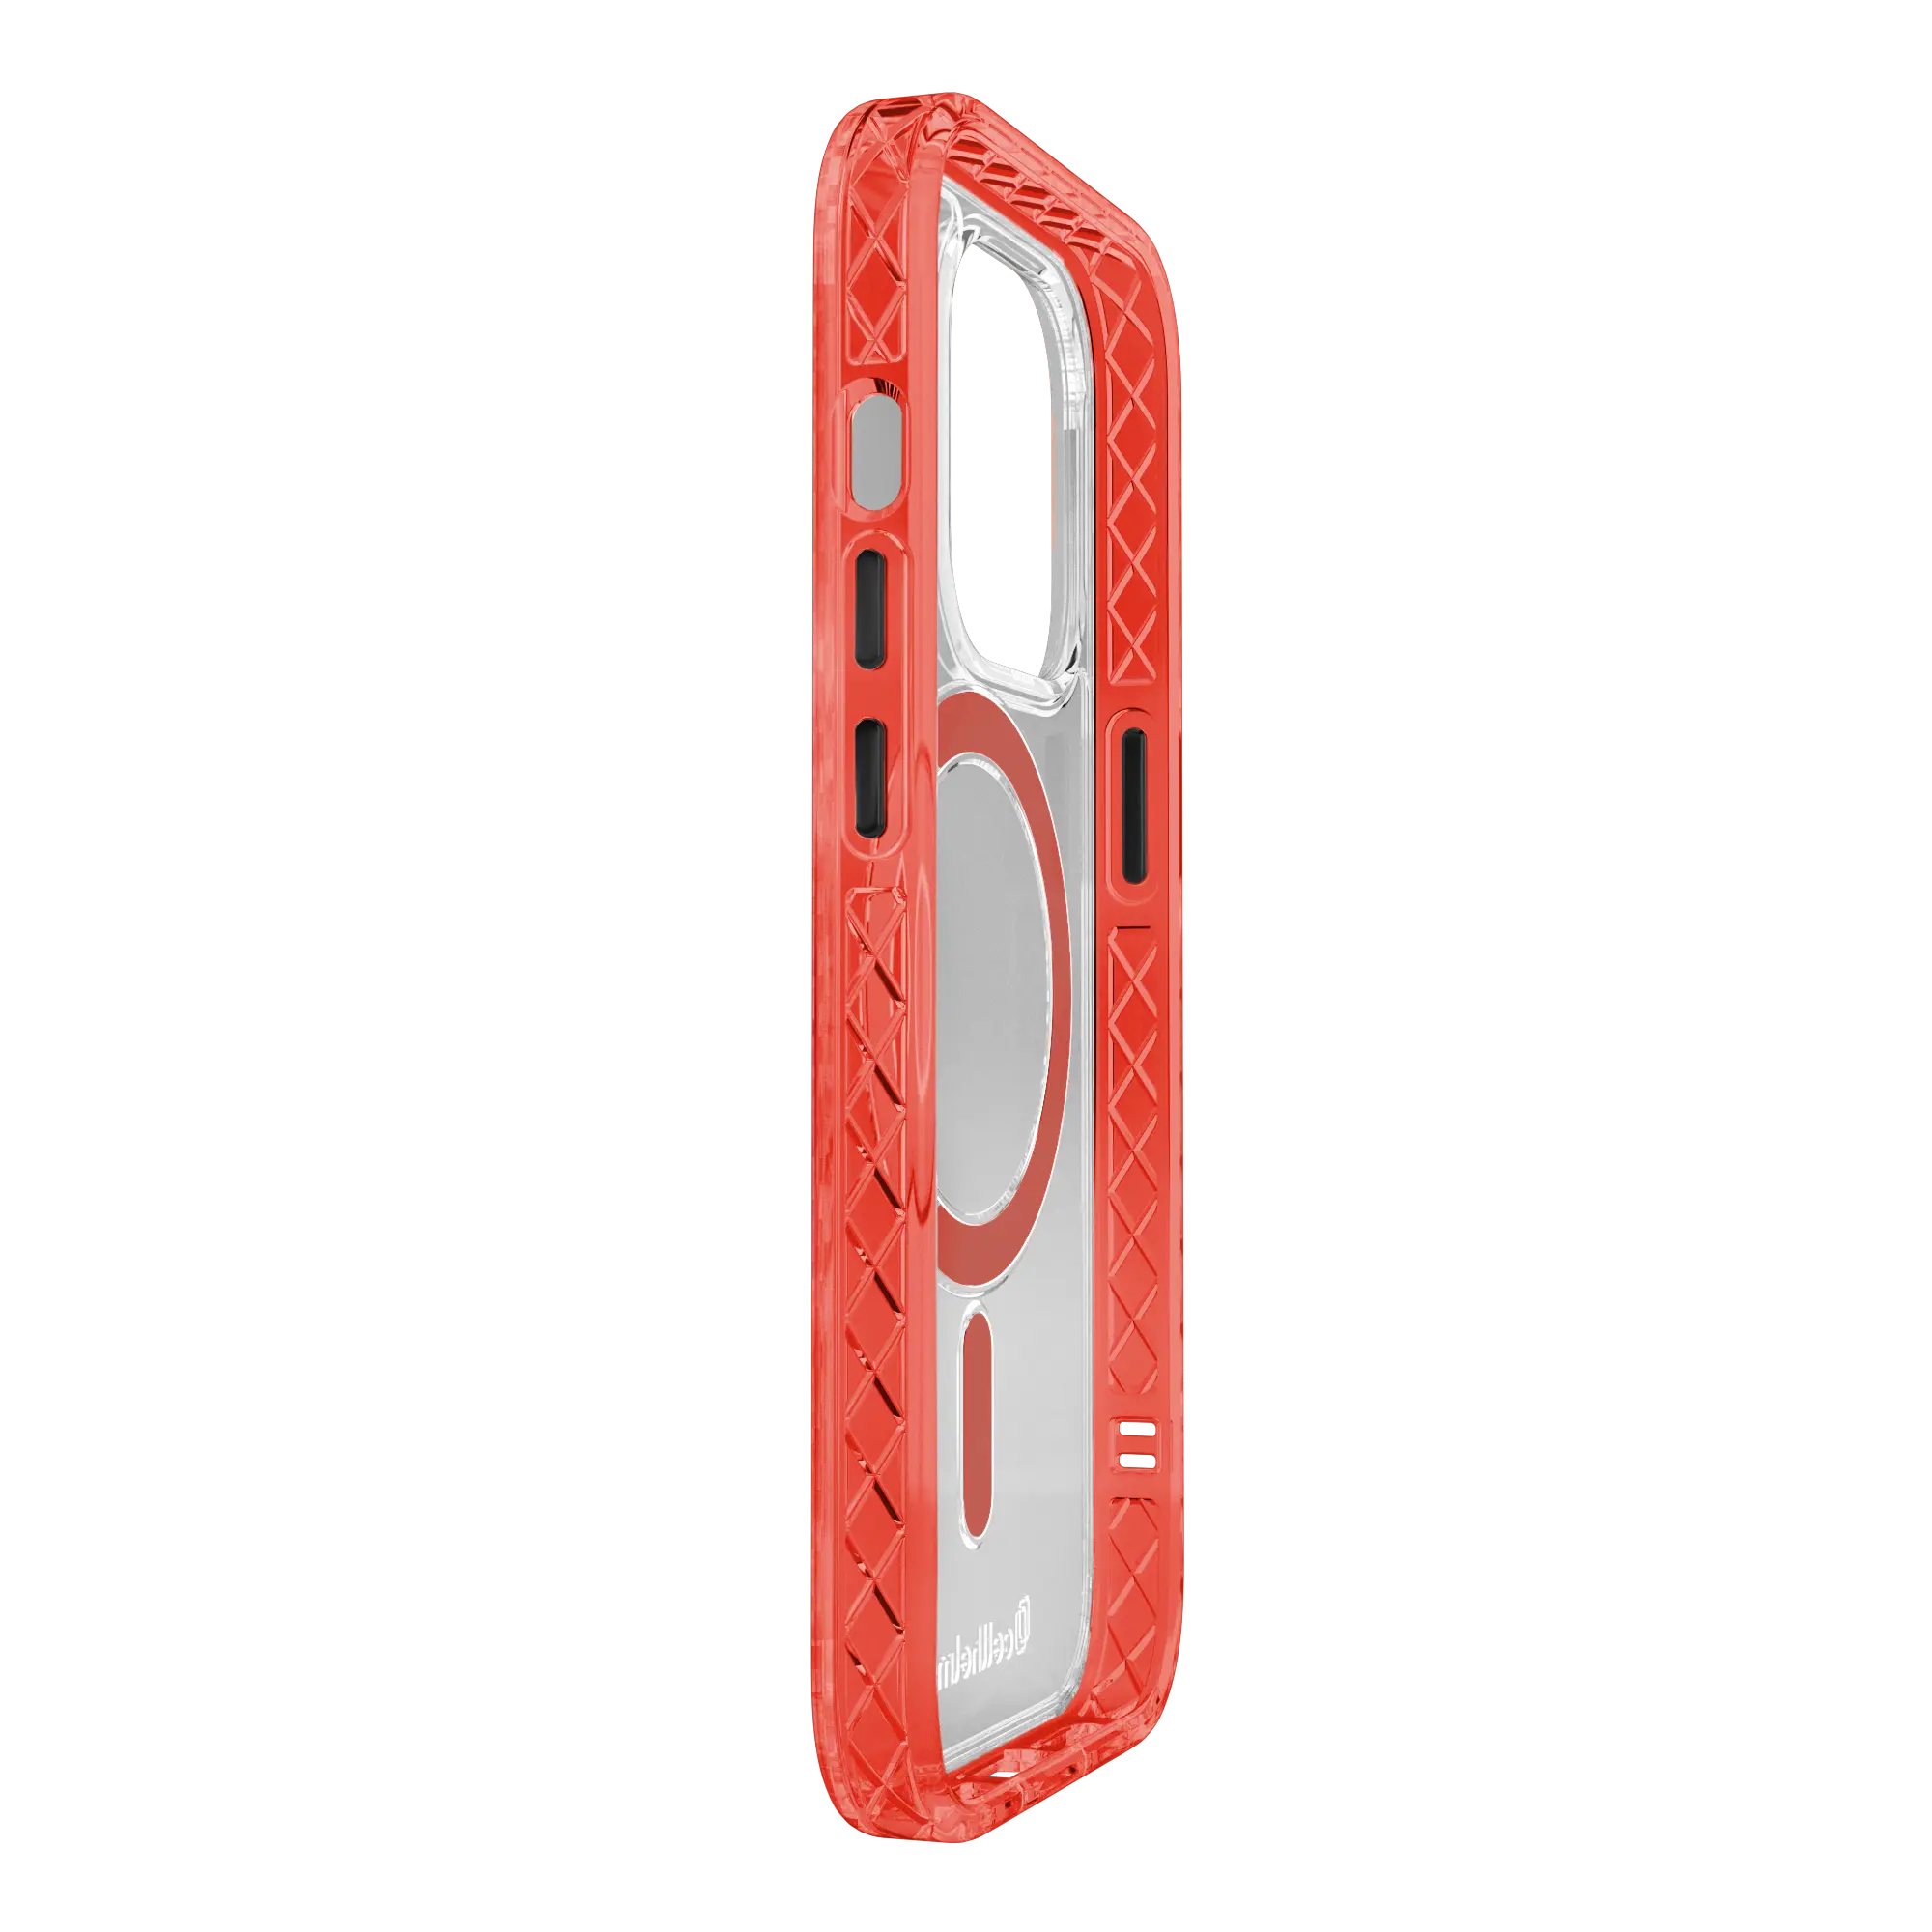 MagSafe Case for Apple iPhone 14 Pro | Turbo Red | Magnitude Series - Case -  - cellhelmet